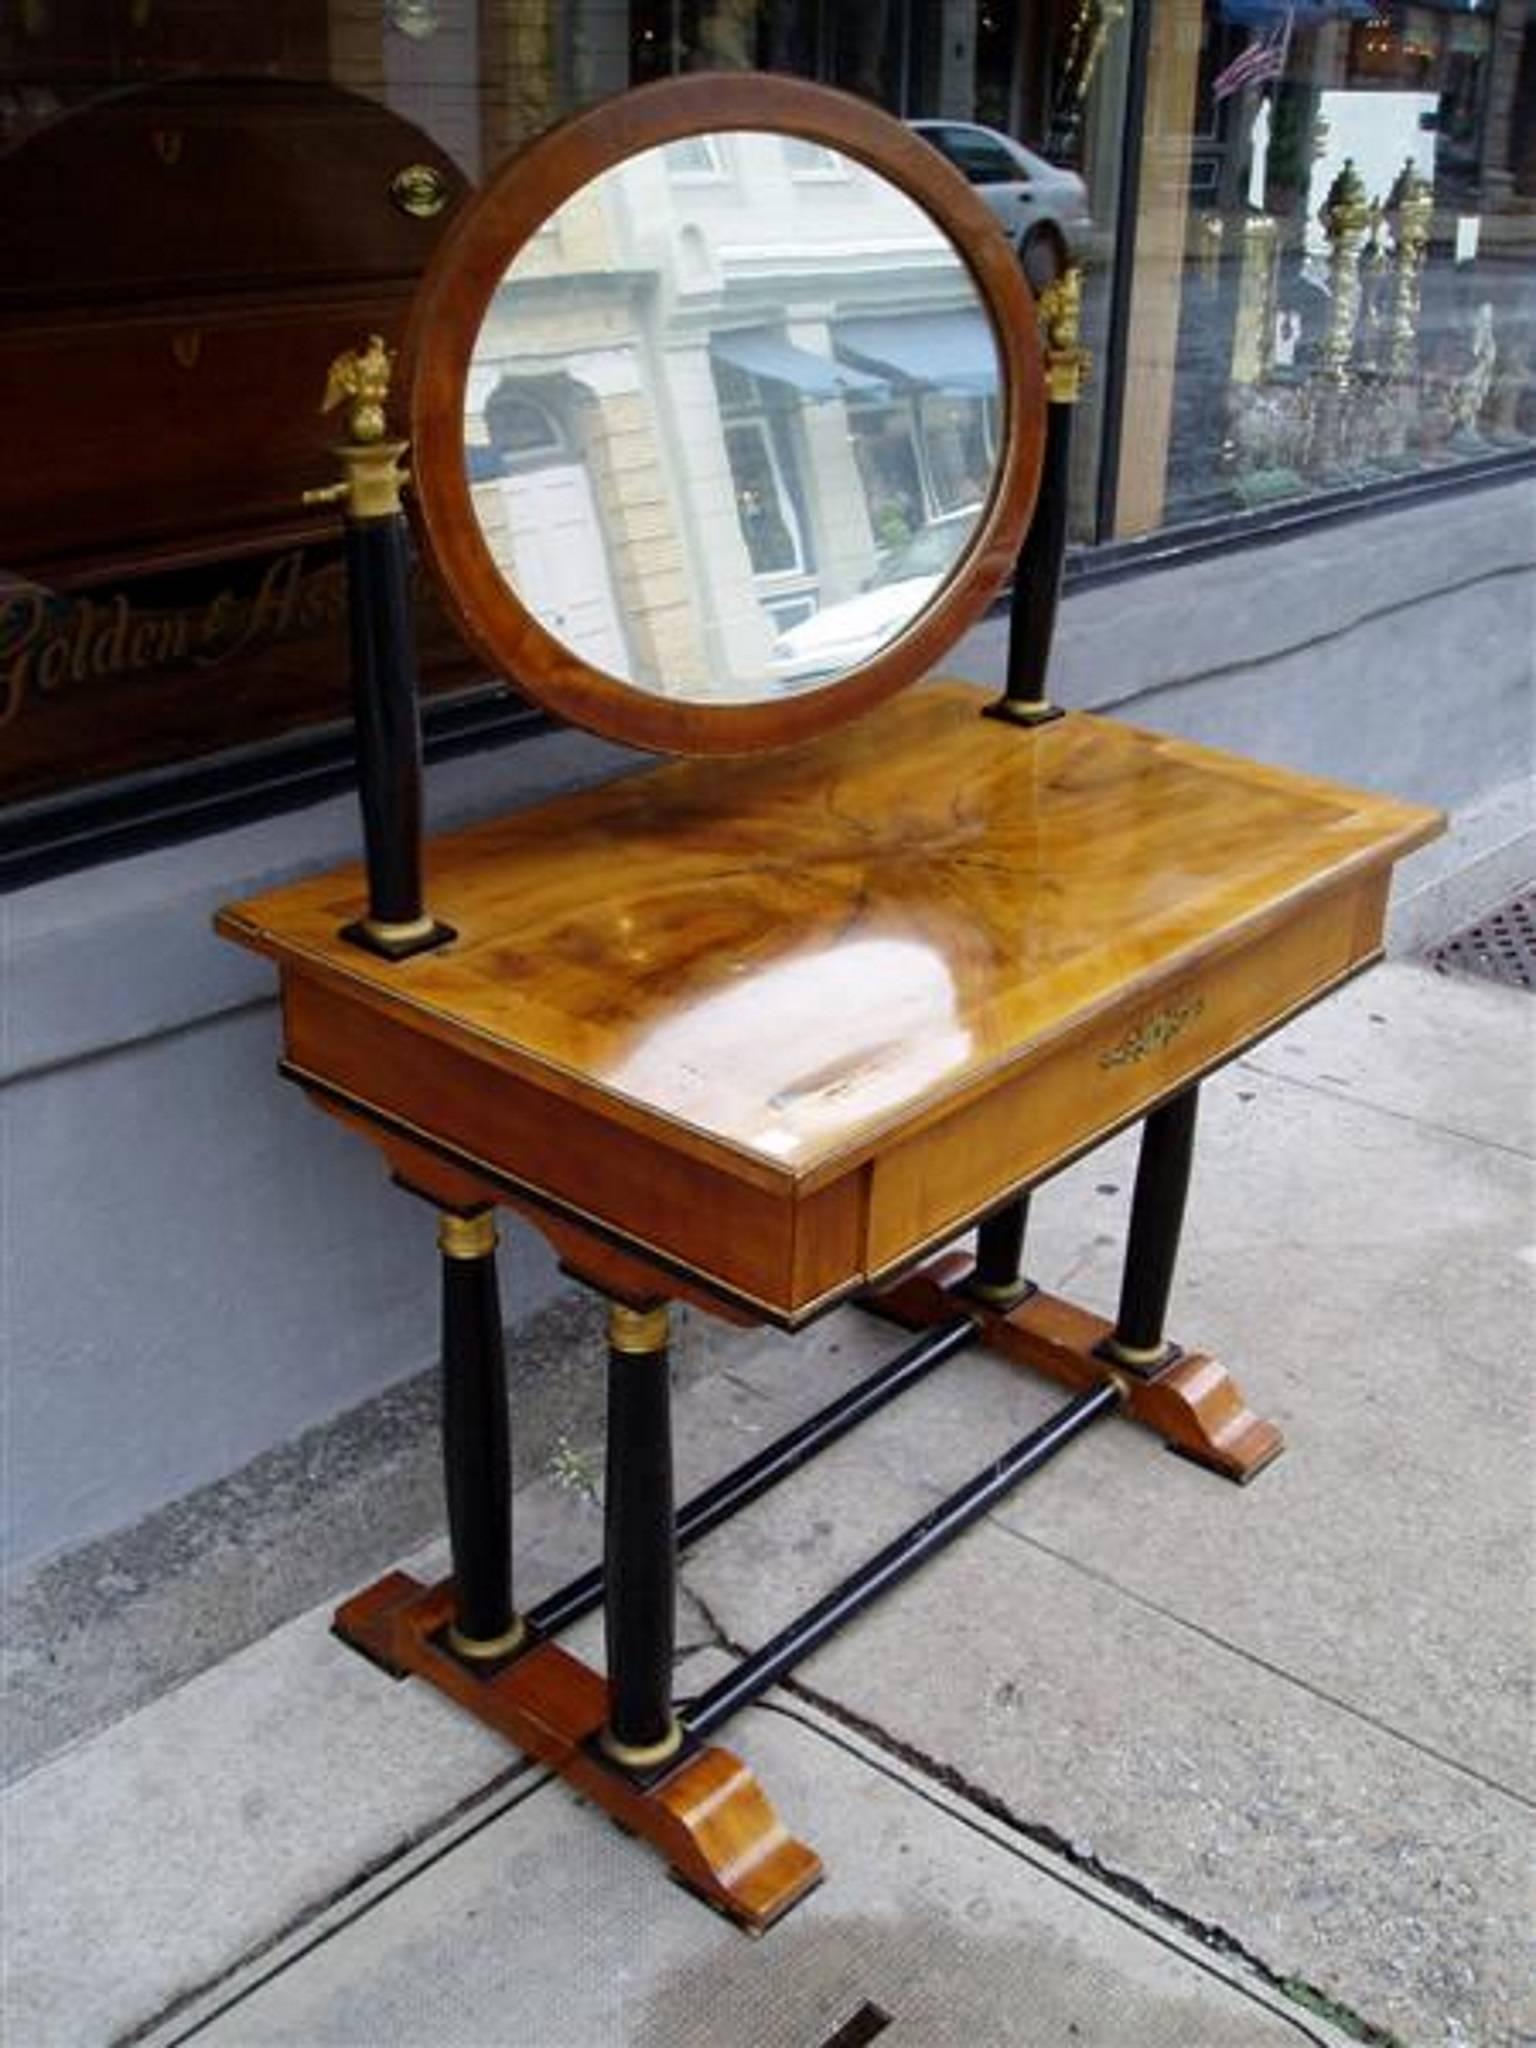 Viennese flame birch veneered dressing table with flanking bronze eagle capitals mounted on ebony columns supporting an adjustable oval veneered framed mirror, centered drawer with beading, ormolu escutcheon and fitted interior, all resting on four